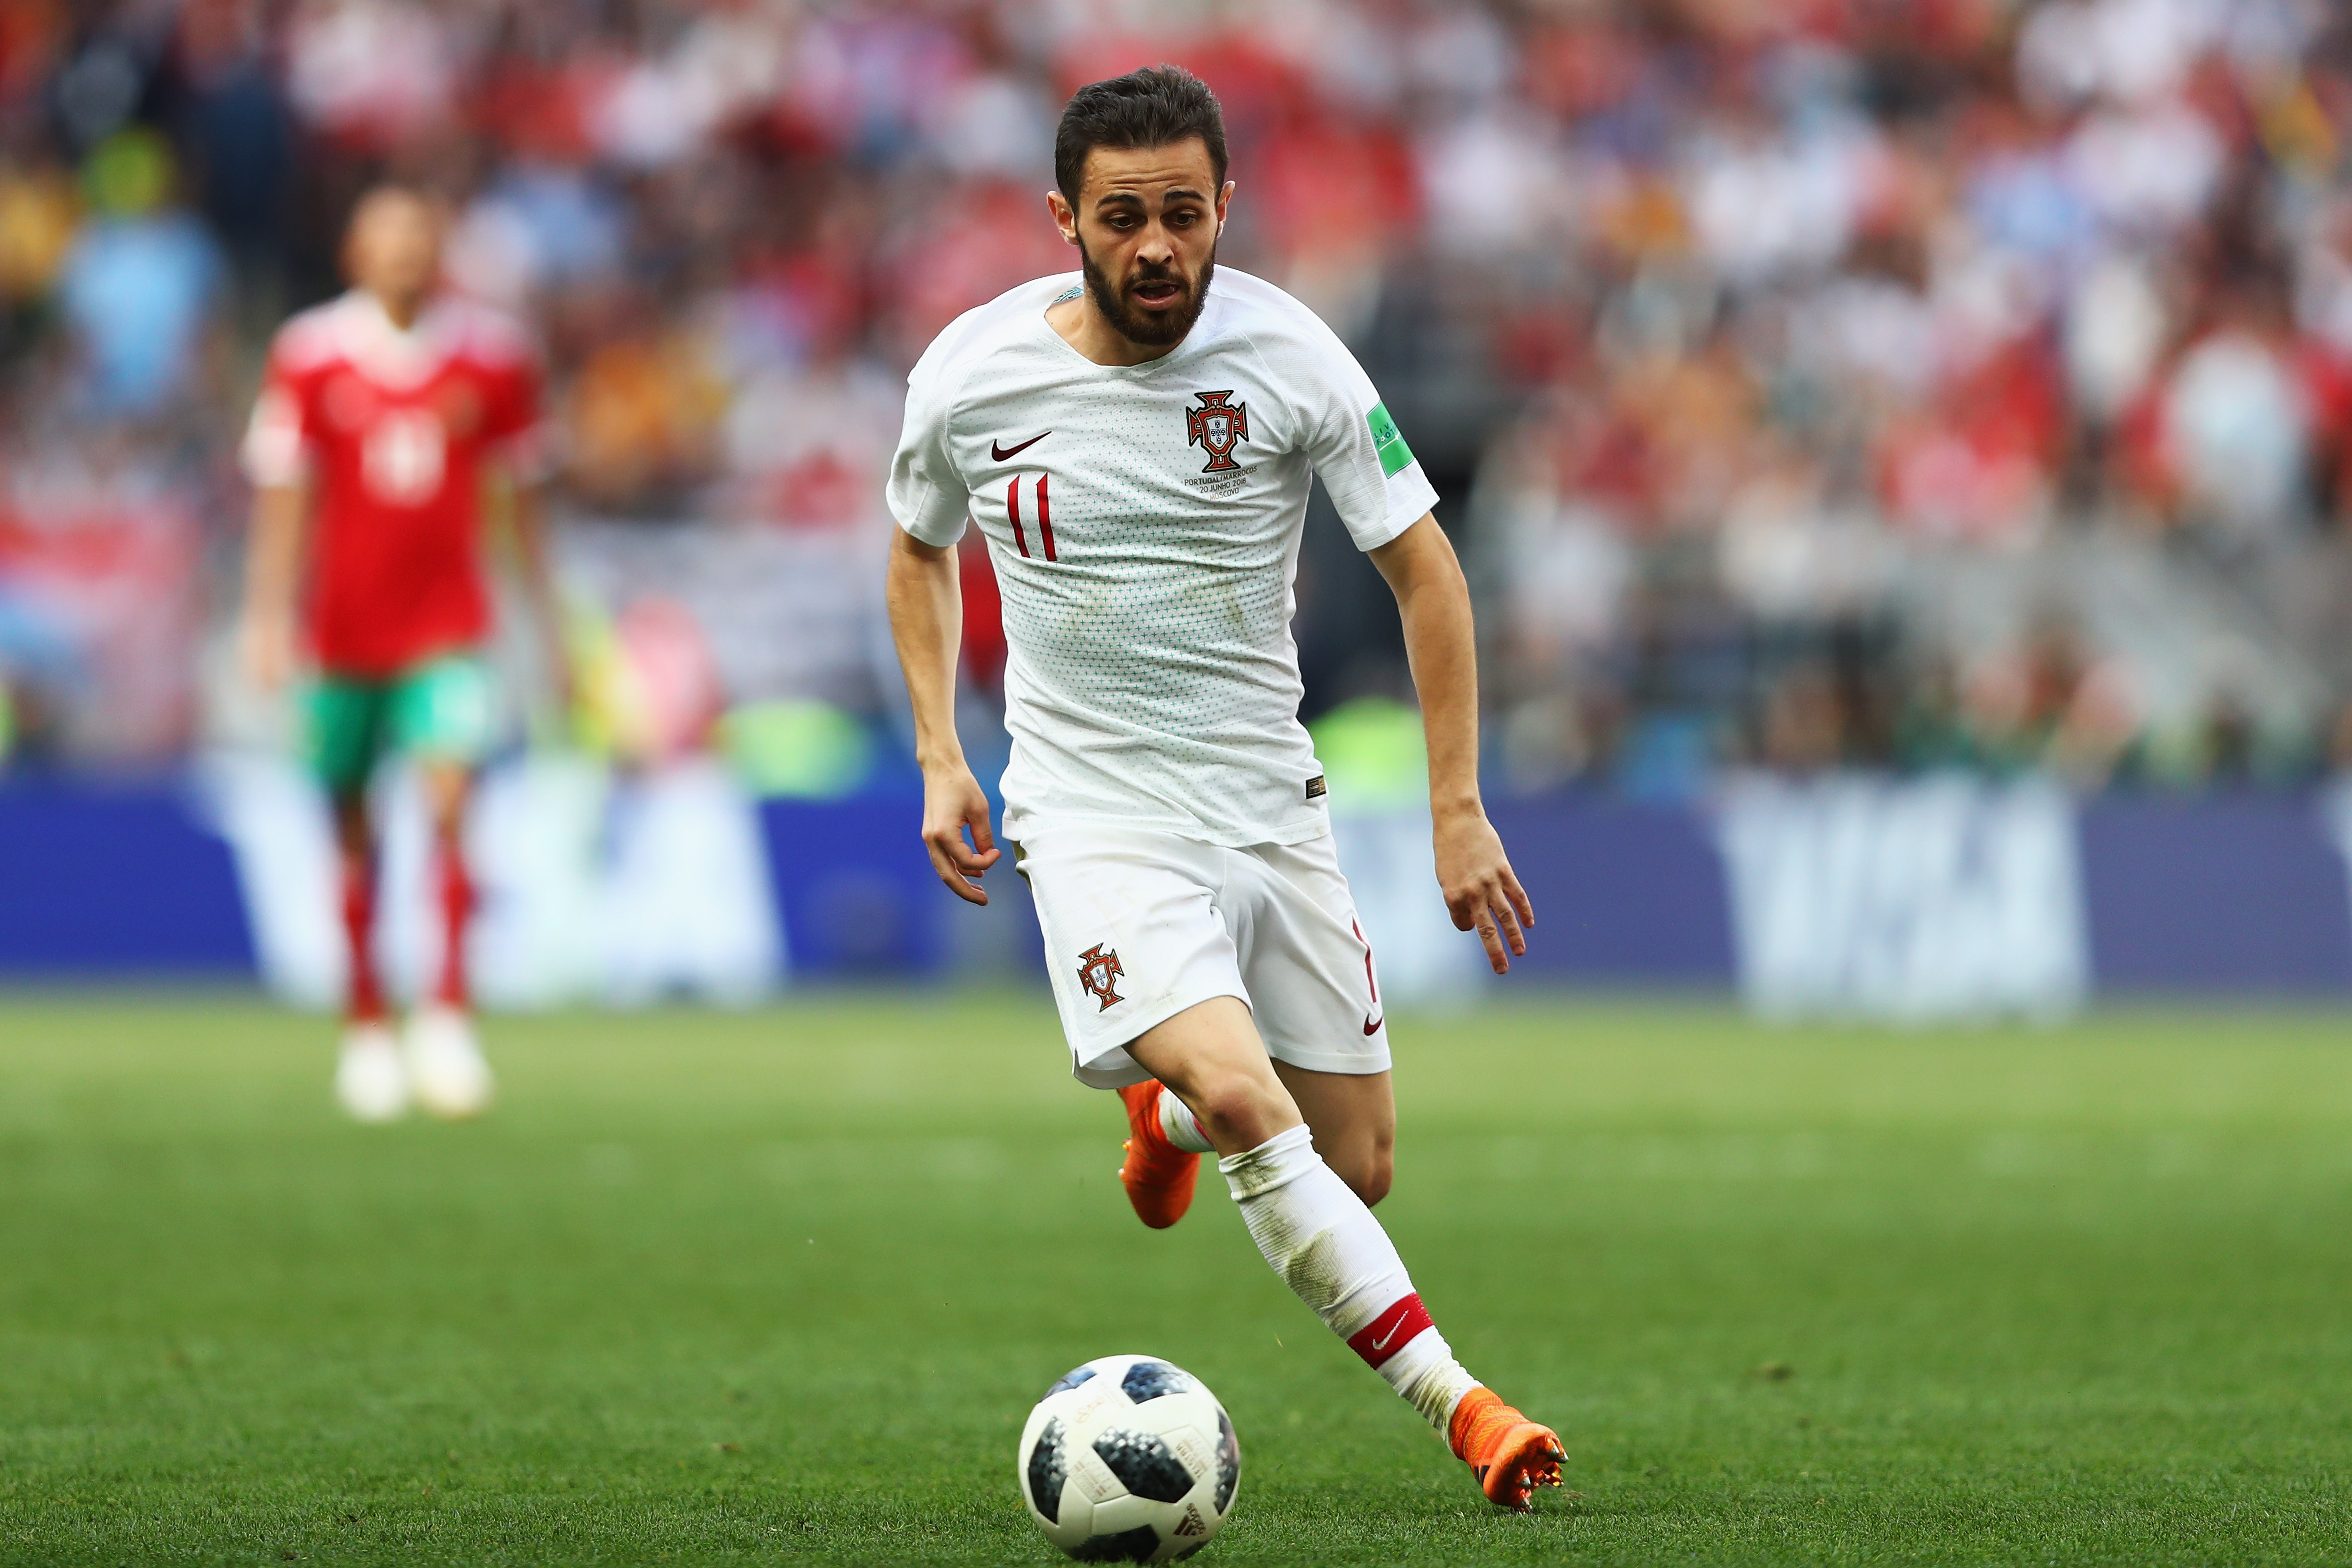 Could Bernardo Silva be on his way to Spain soon? (Photo by Dean Mouhtaropoulos/Getty Images)